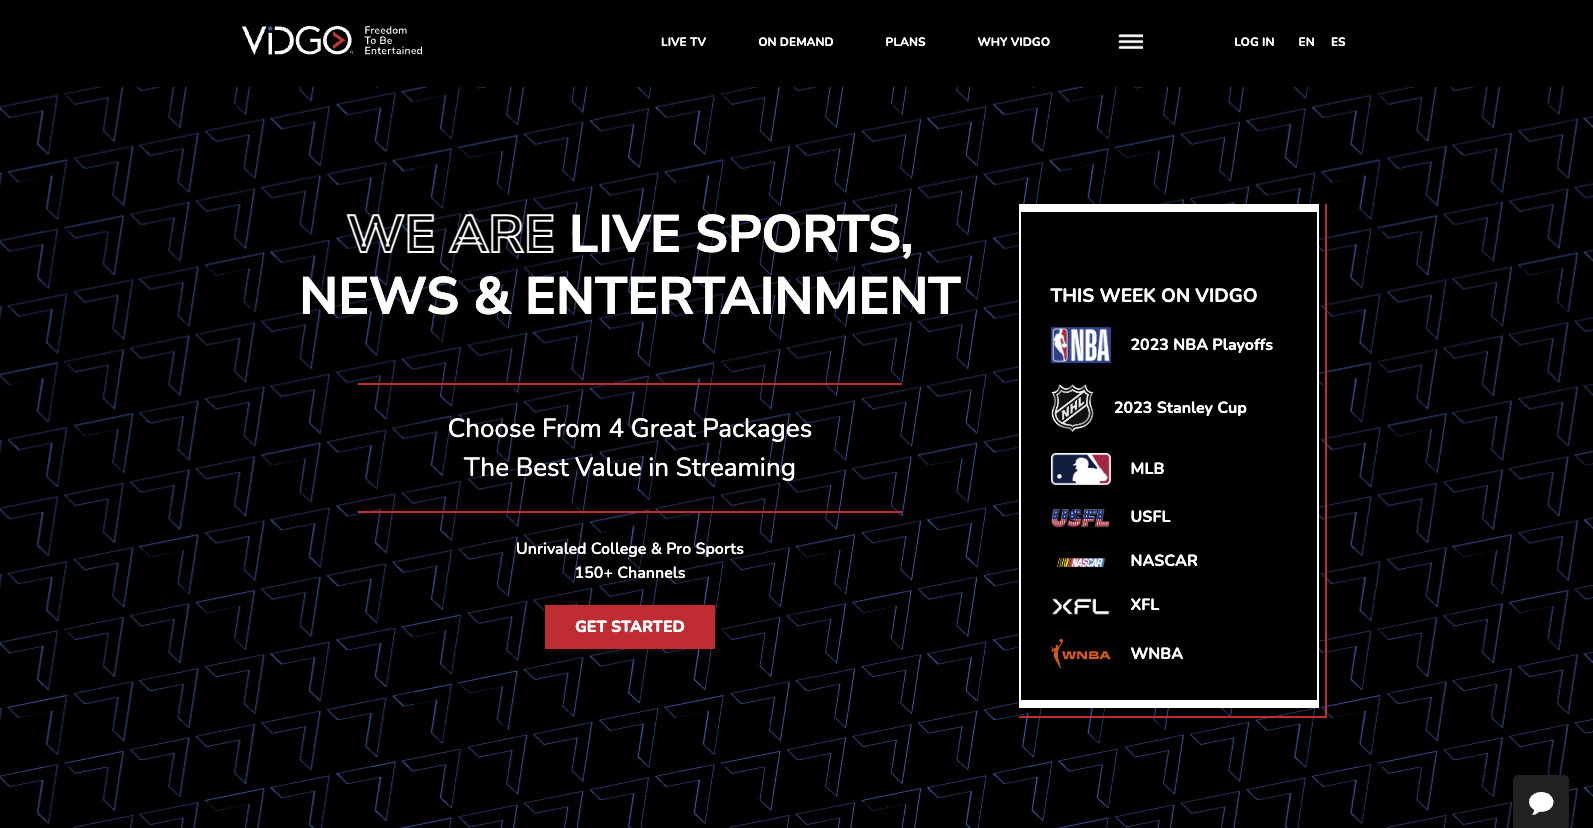 Vidgo is a reliable live TV service that offers over 150 live channels and major sports packages that users can view from anywhere in the world.